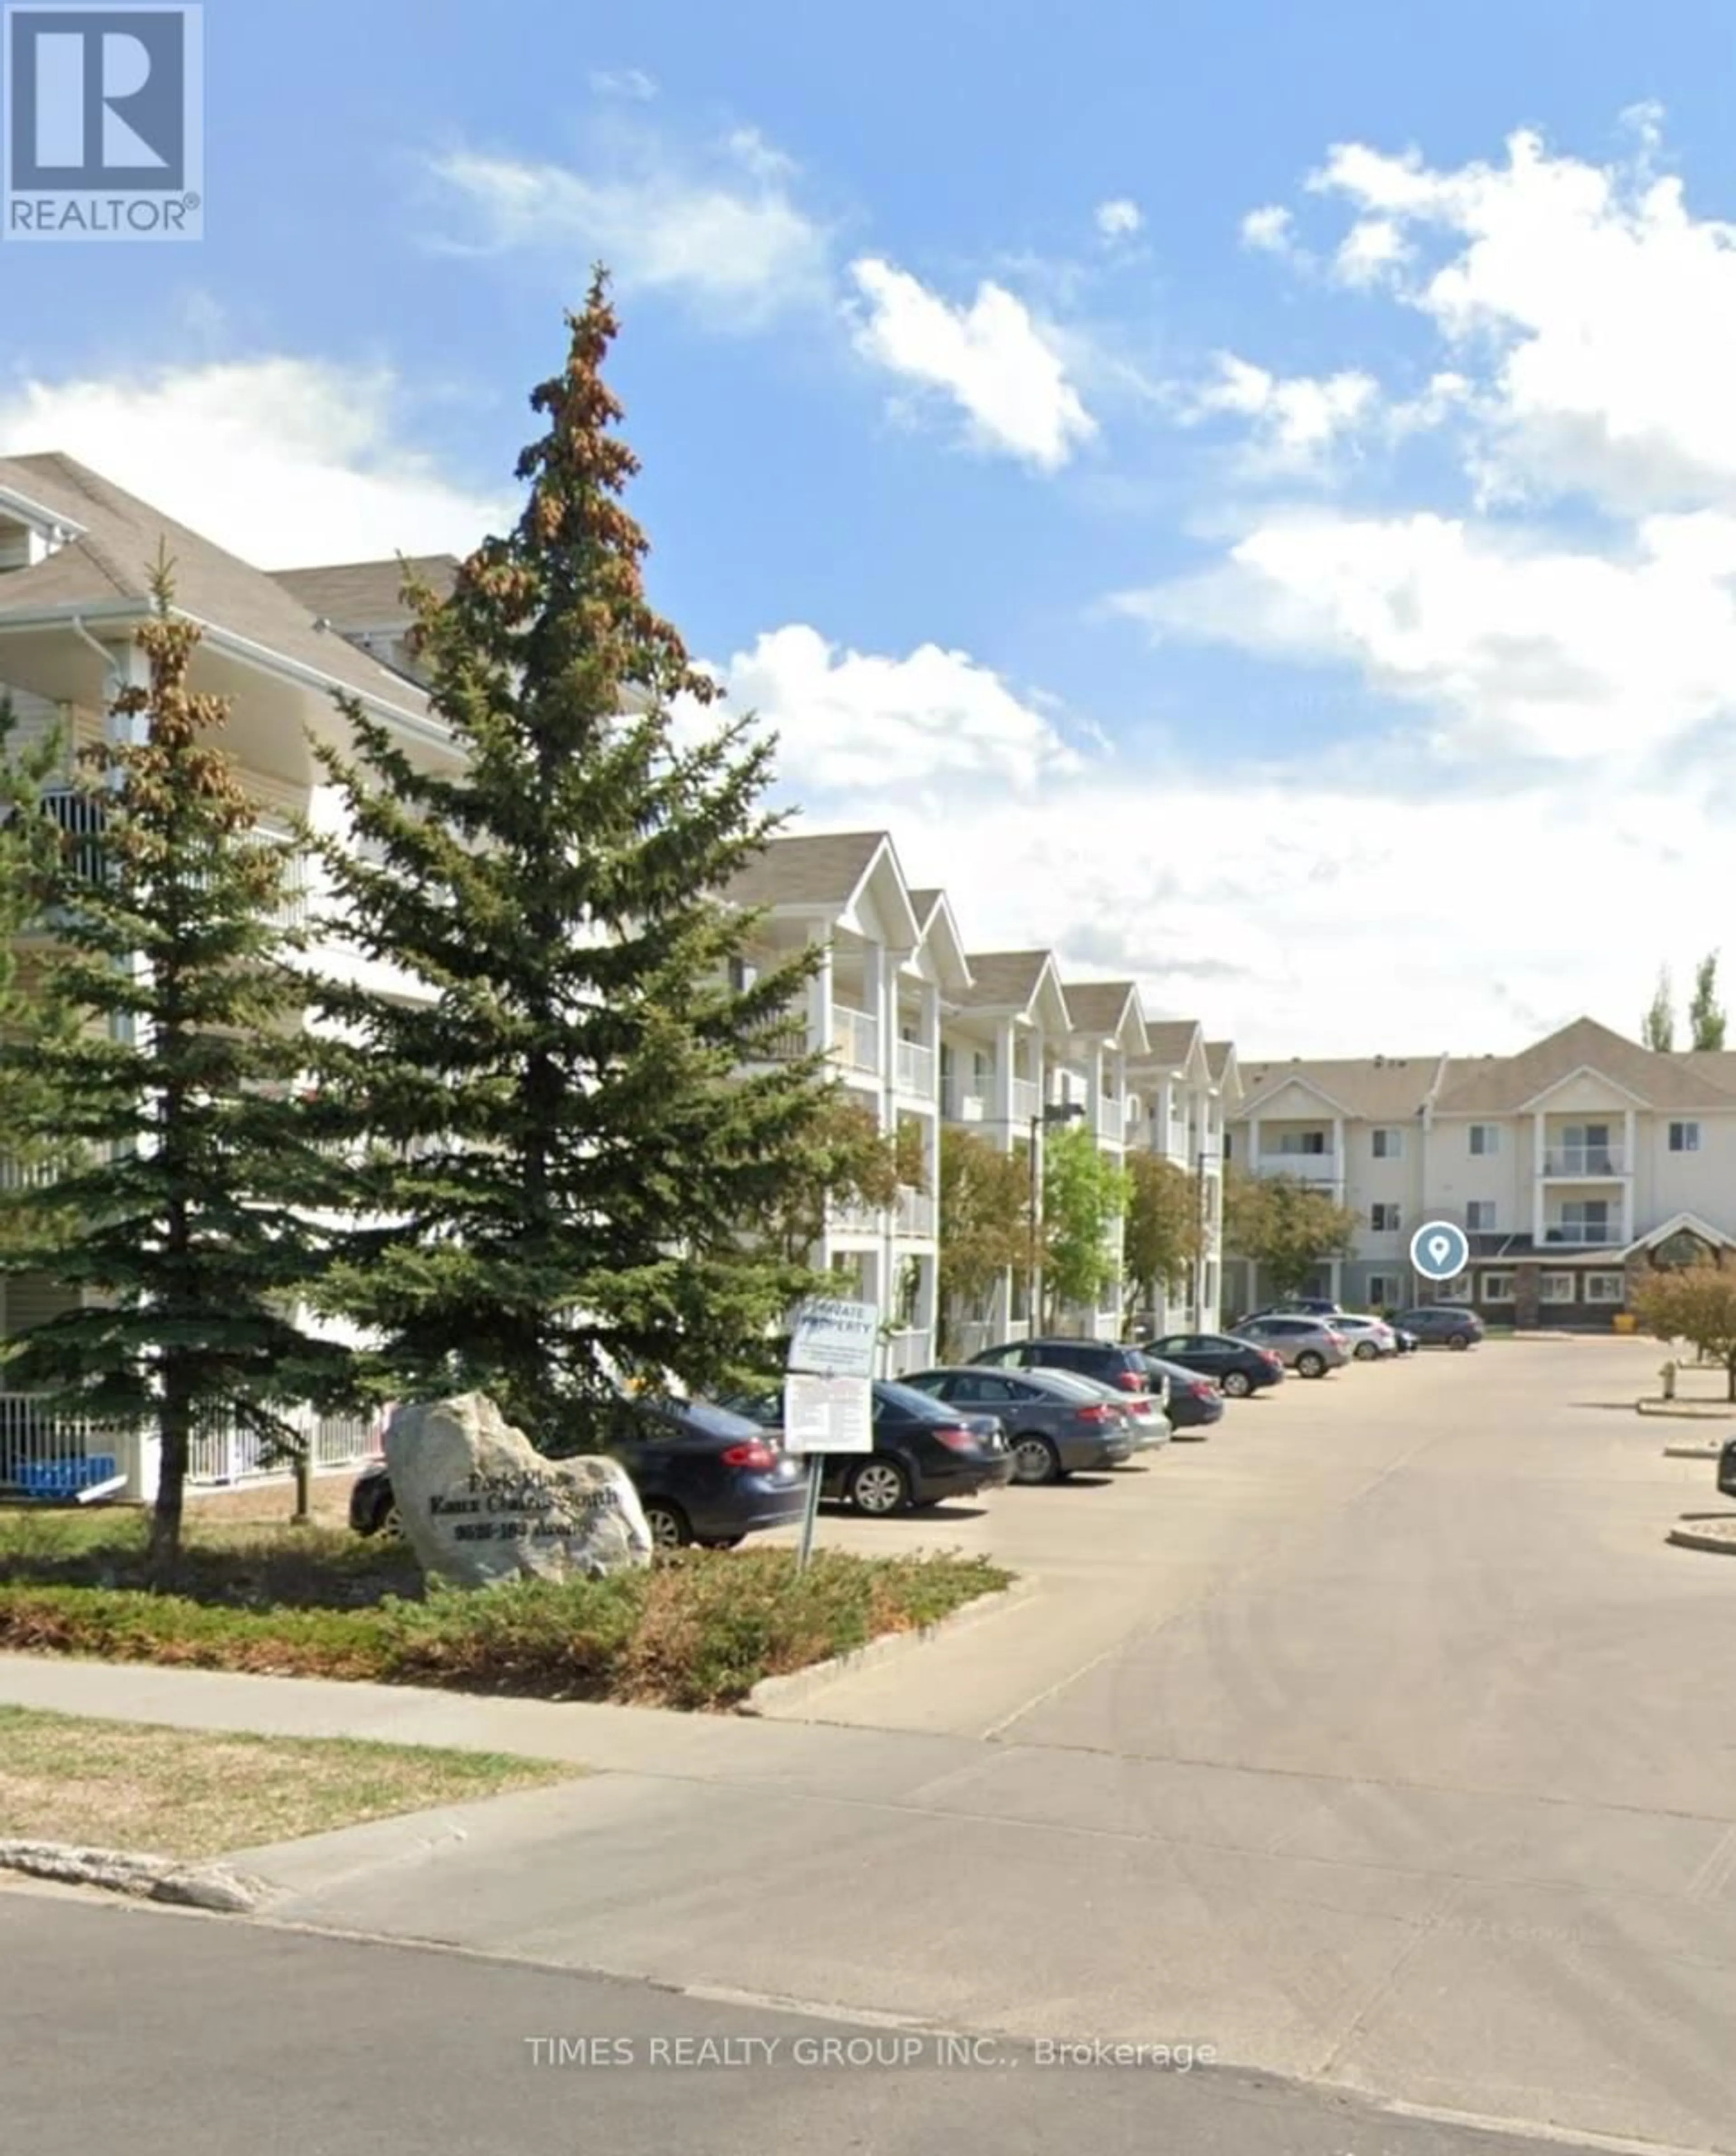 A pic from exterior of the house or condo for 322 - 9525 162 AVE NW, Edmonton Alberta T5Z3V2